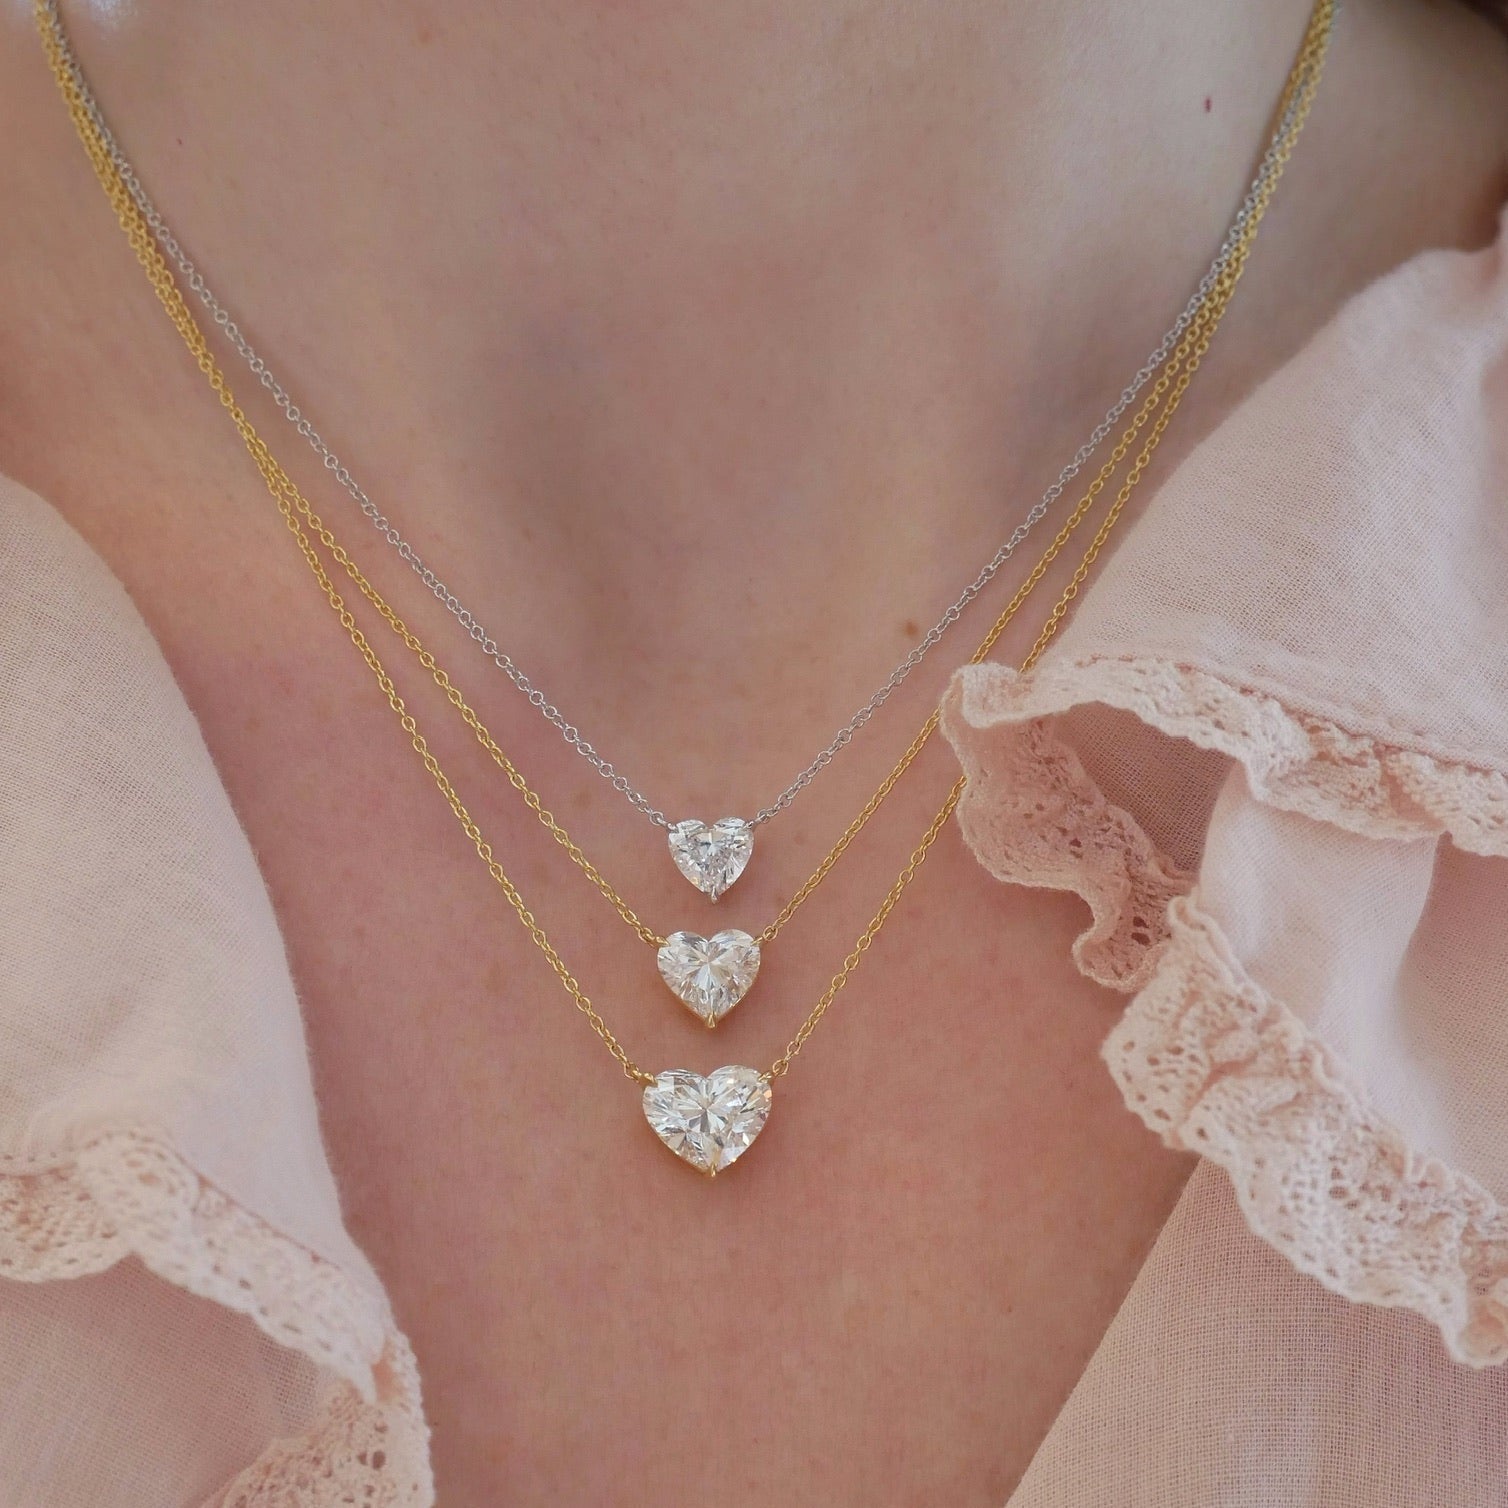 Diamond Heart Solitaire Necklace in 14k white gold with 1.02 carat heart shaped diamond and 18k yellow gold 2.02 carat heart shaped diamond and 18k yellow gold chain with 3.01 heart shape diamond styled on neck of model